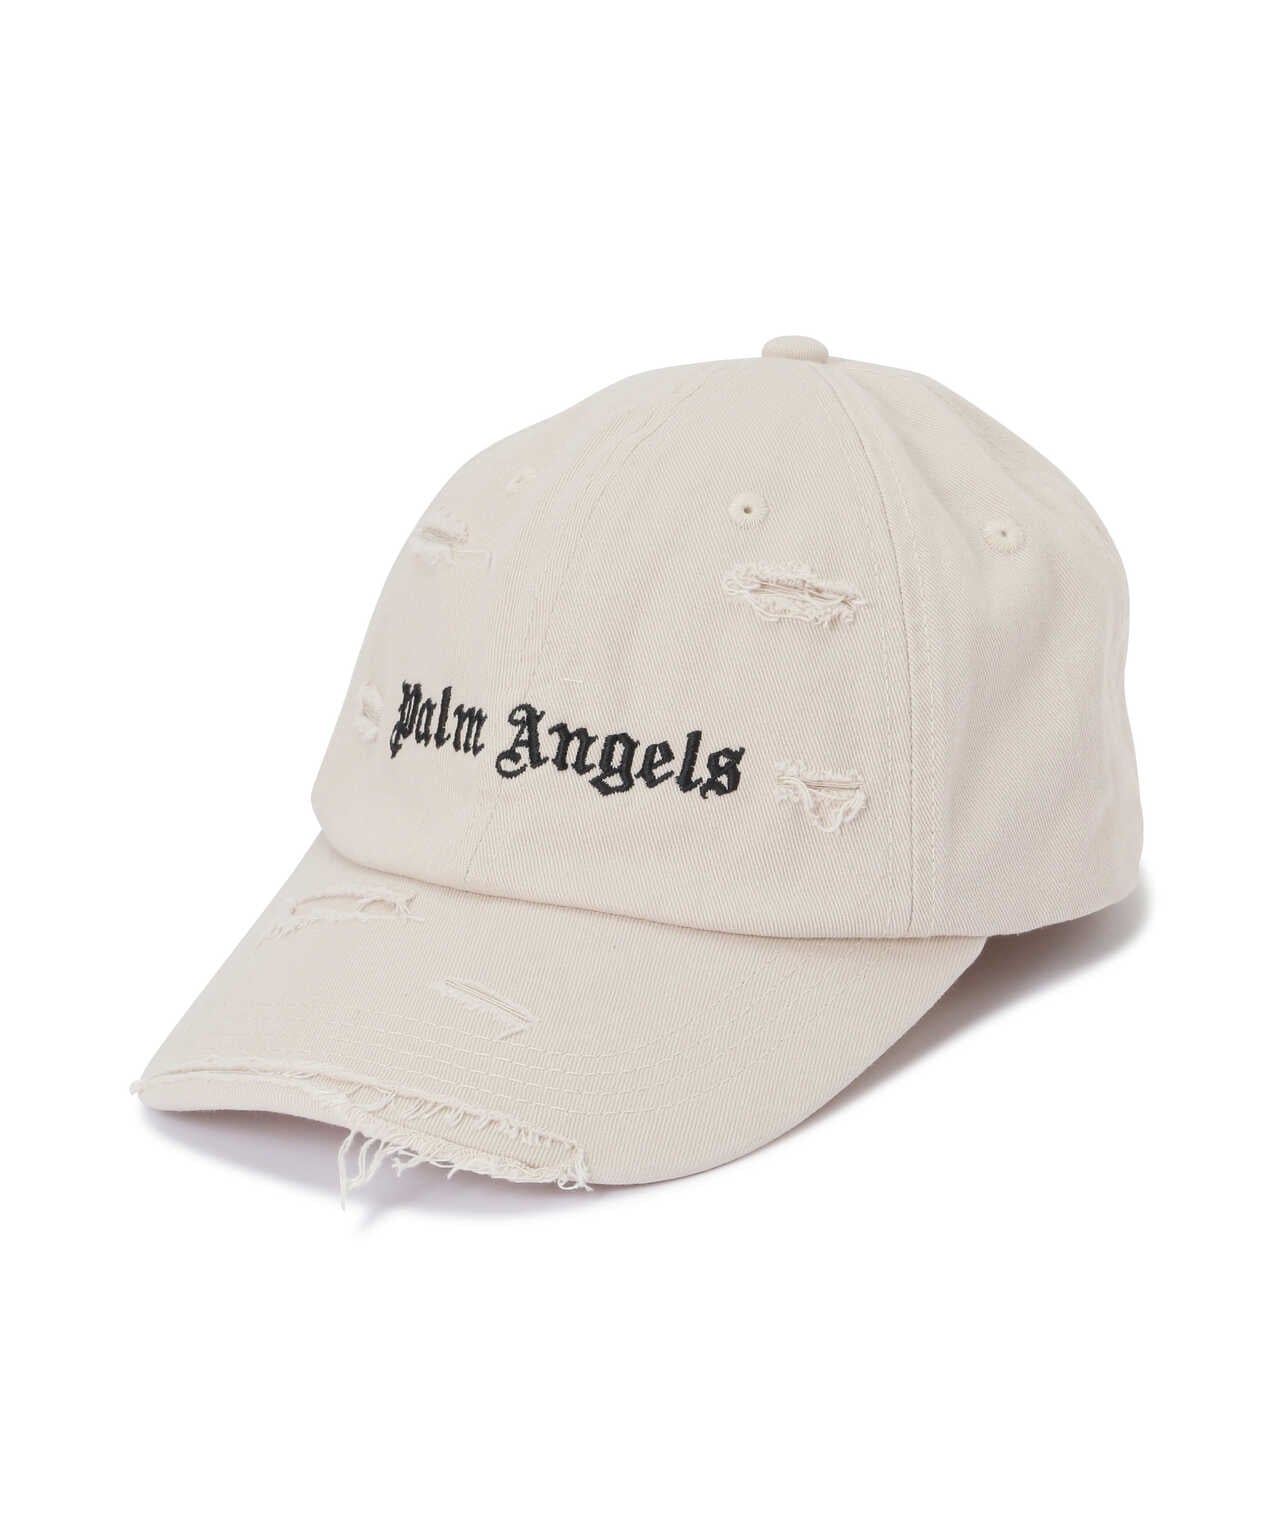 【T-Pablow 着用】palm angels キャップ